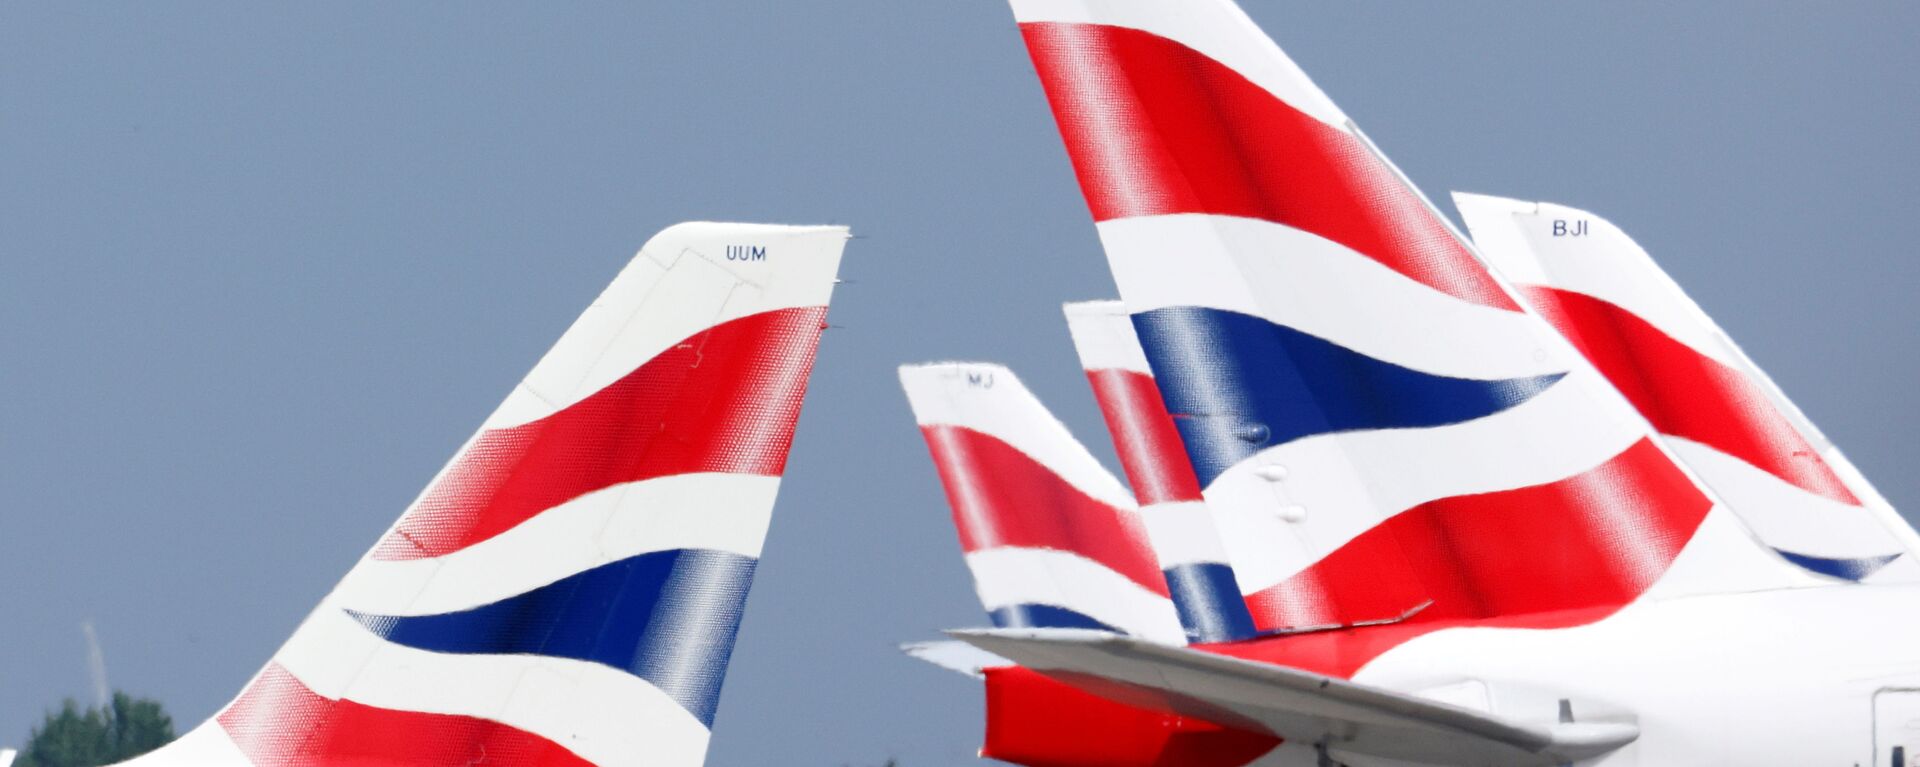  British Airways tail fins are pictured at Heathrow Airport in London, Britain, May 17, 202 - Sputnik International, 1920, 25.02.2022